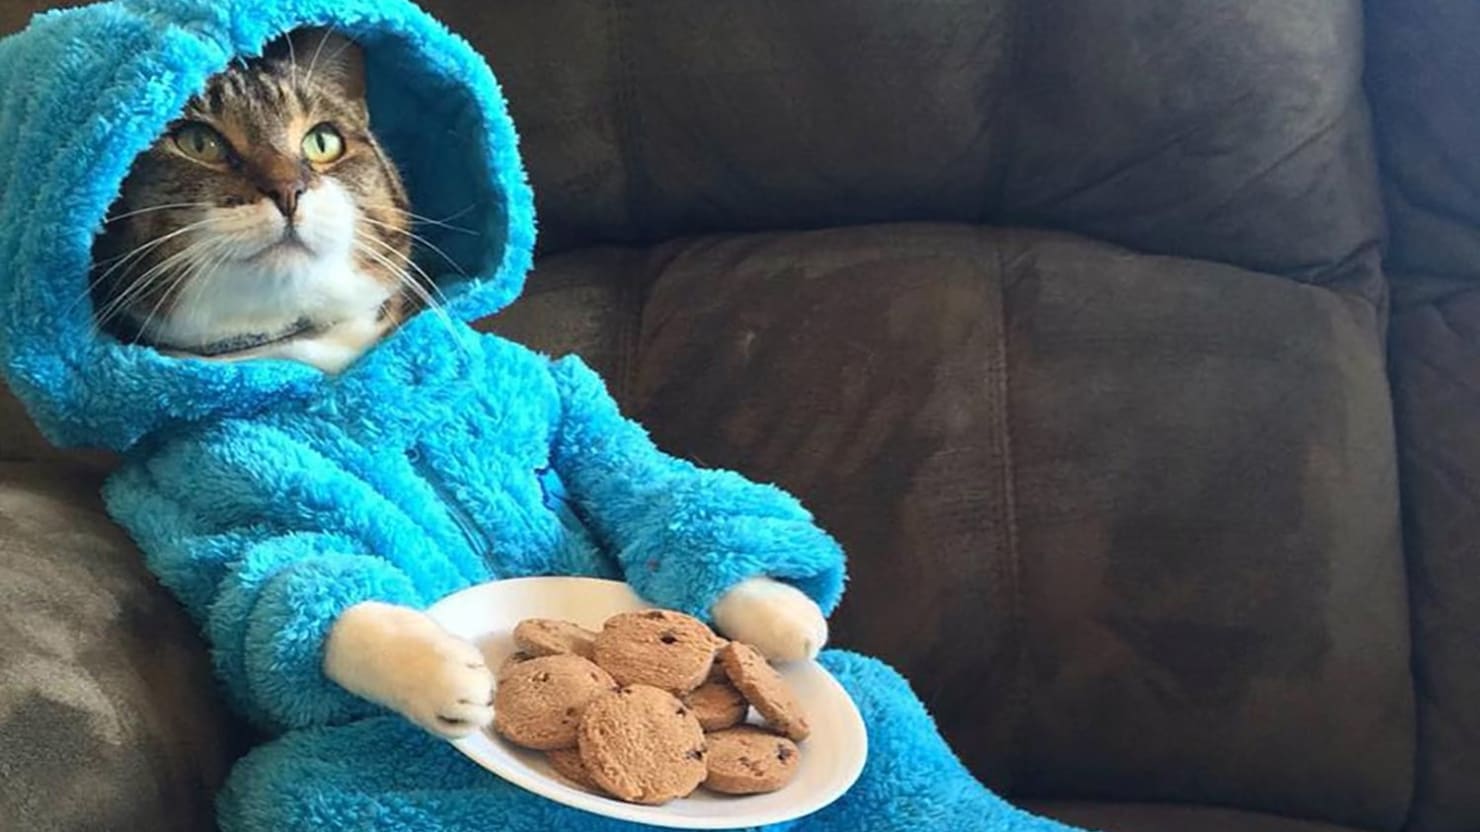 U.S. Embassy Accidentally Distributes Photo of a Cat Dressed as Cookie Monster1480 x 832